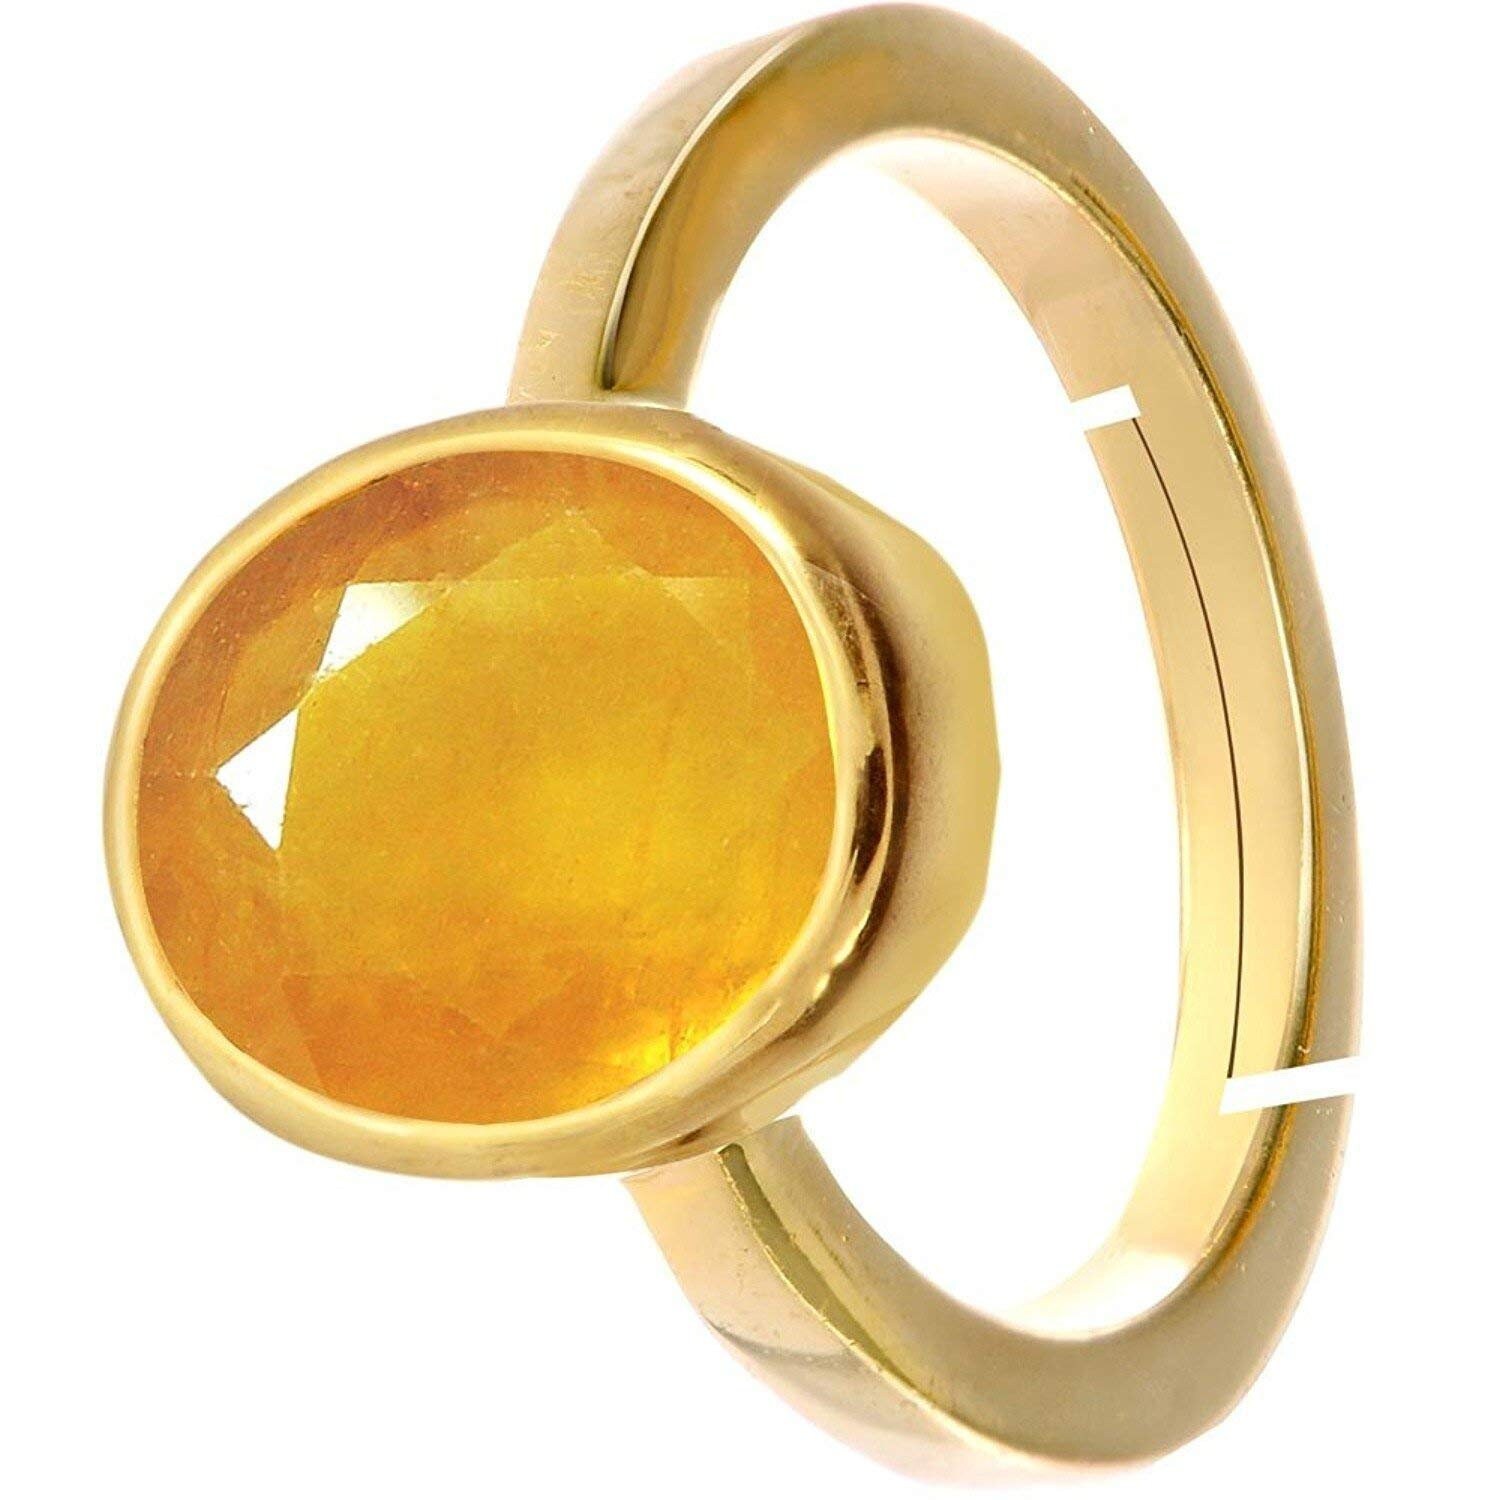 Buy MBVGEMS YELLOW RING 8.00 Ratti PUKHRAJ RING Gold Plated Adjustable Ring  Astrological Gemstone for Men and Women (Lab - Tested)WITH CERTIFICATE at  Amazon.in